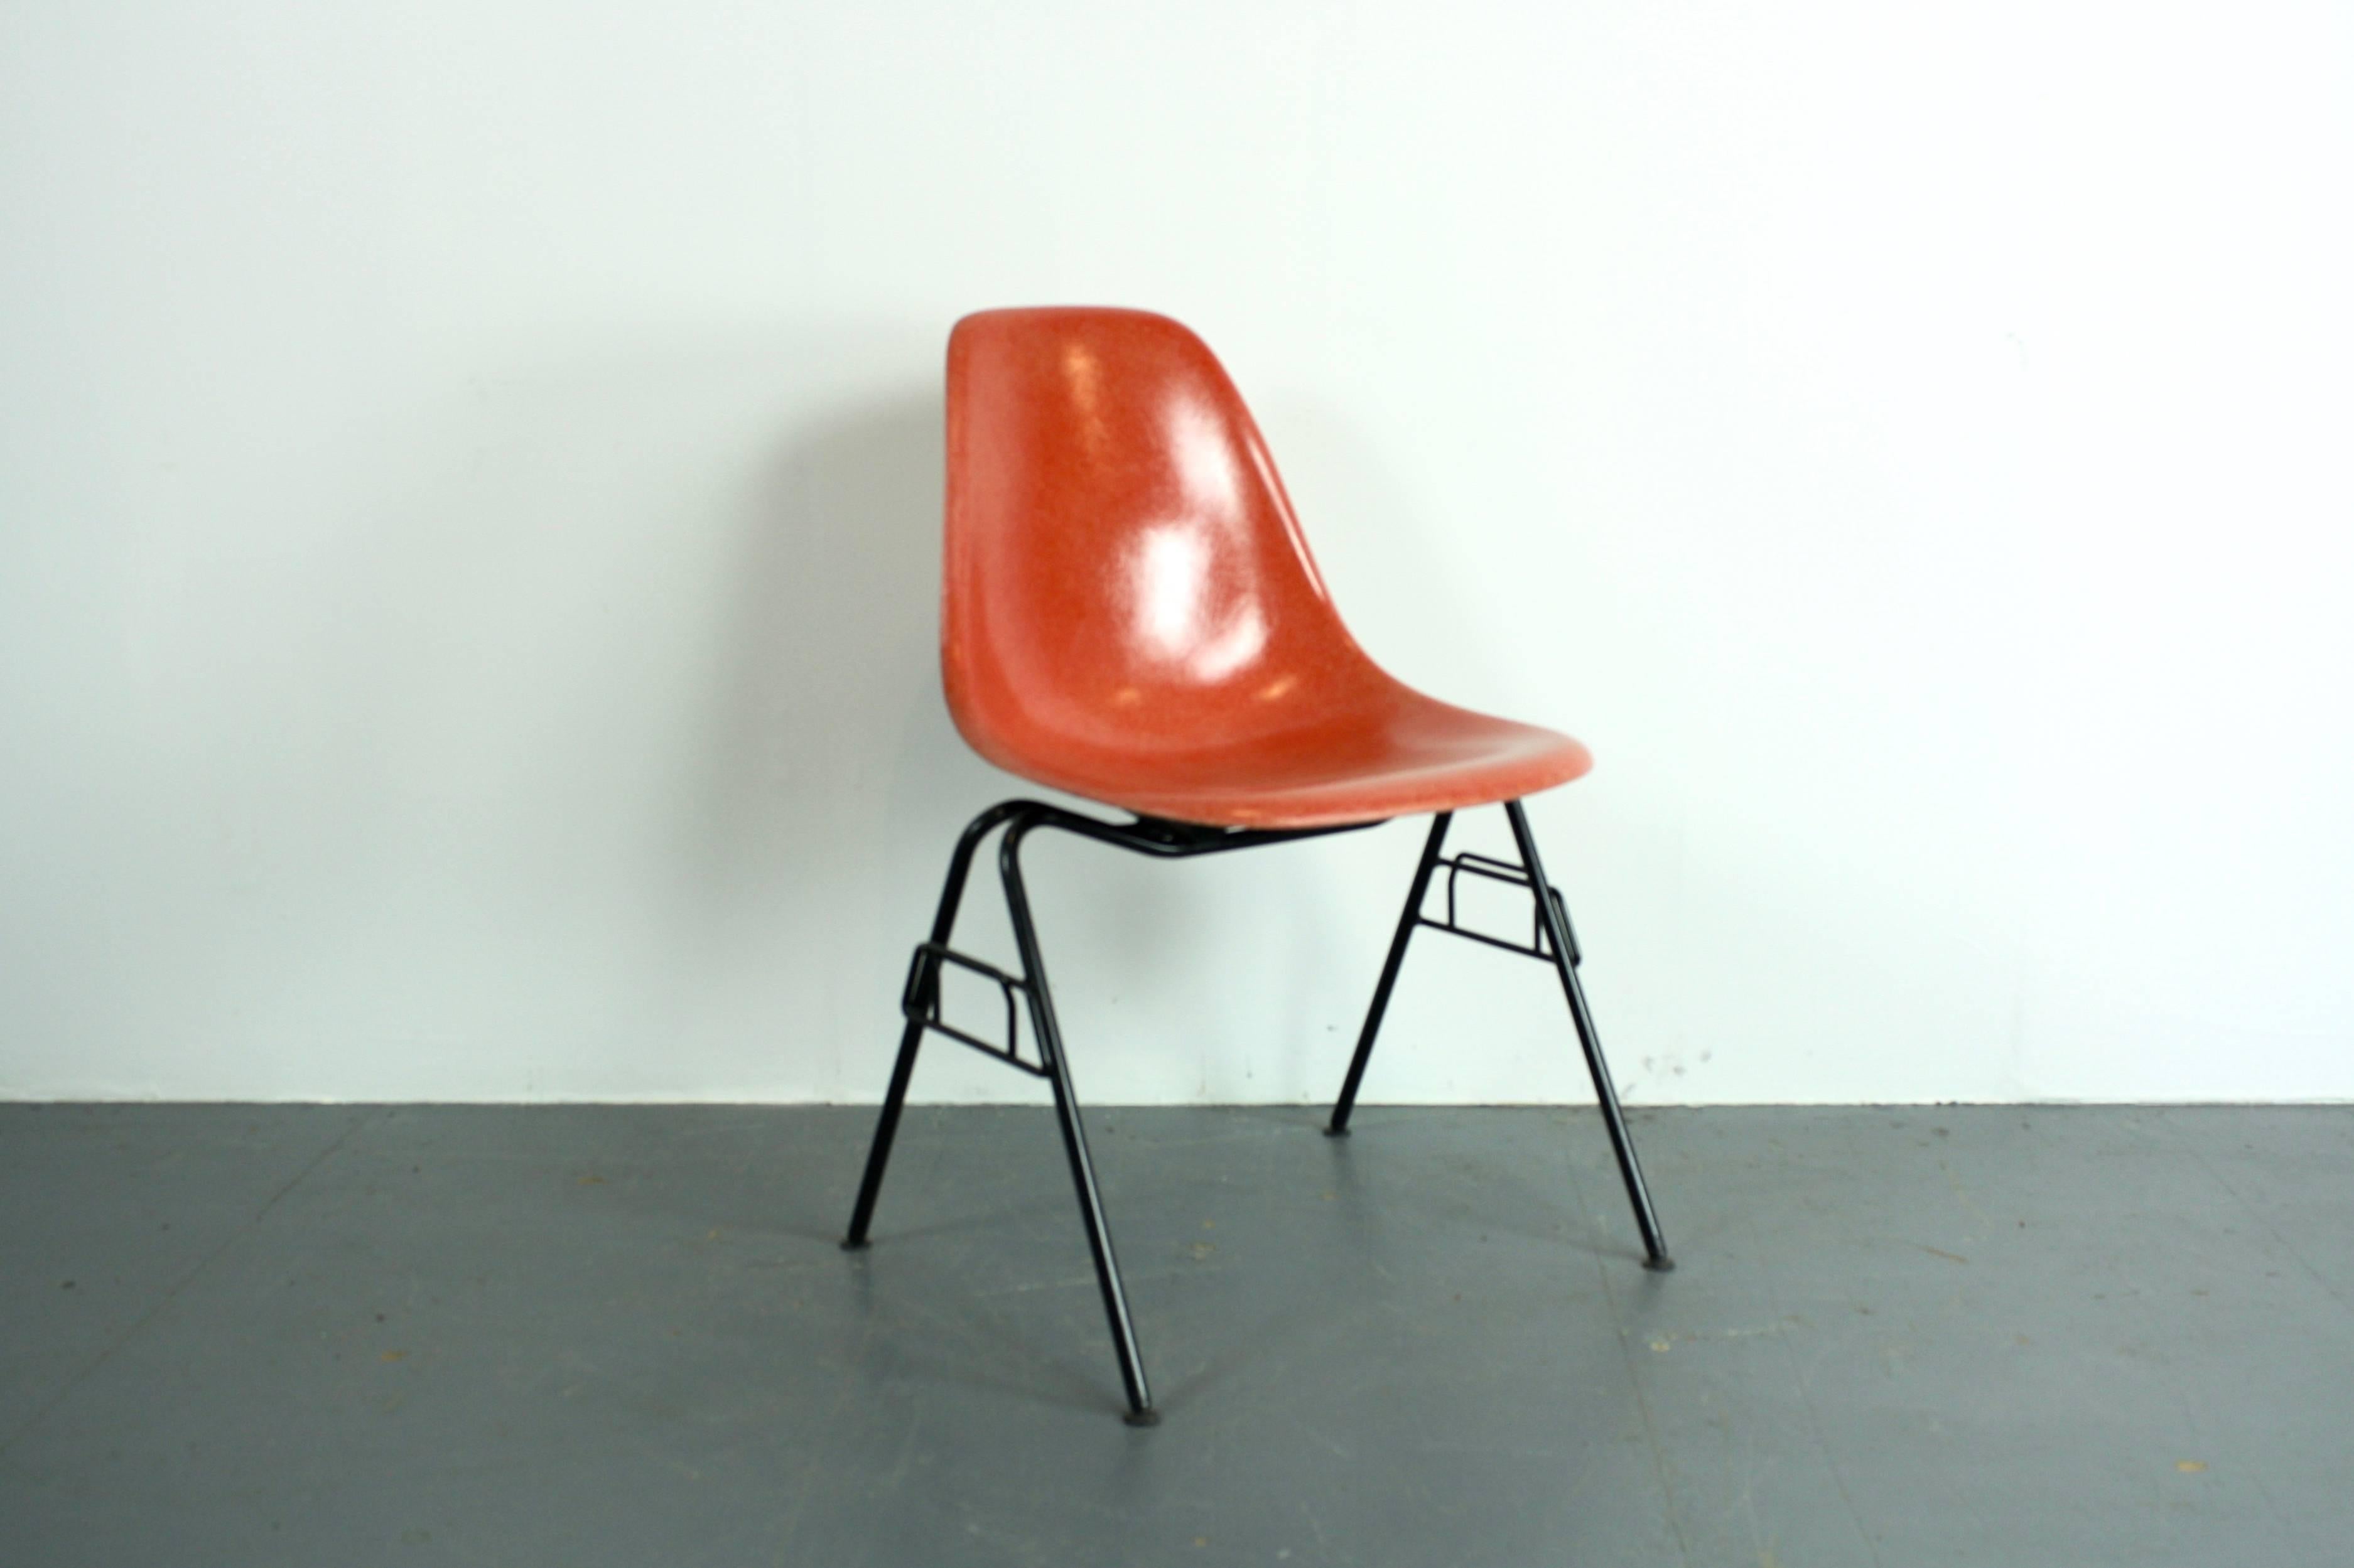 DSS chair designed by Charles Eames and made by Herman Miller in the late 1950s-early 1960s. Original fibreglass weave shell in 